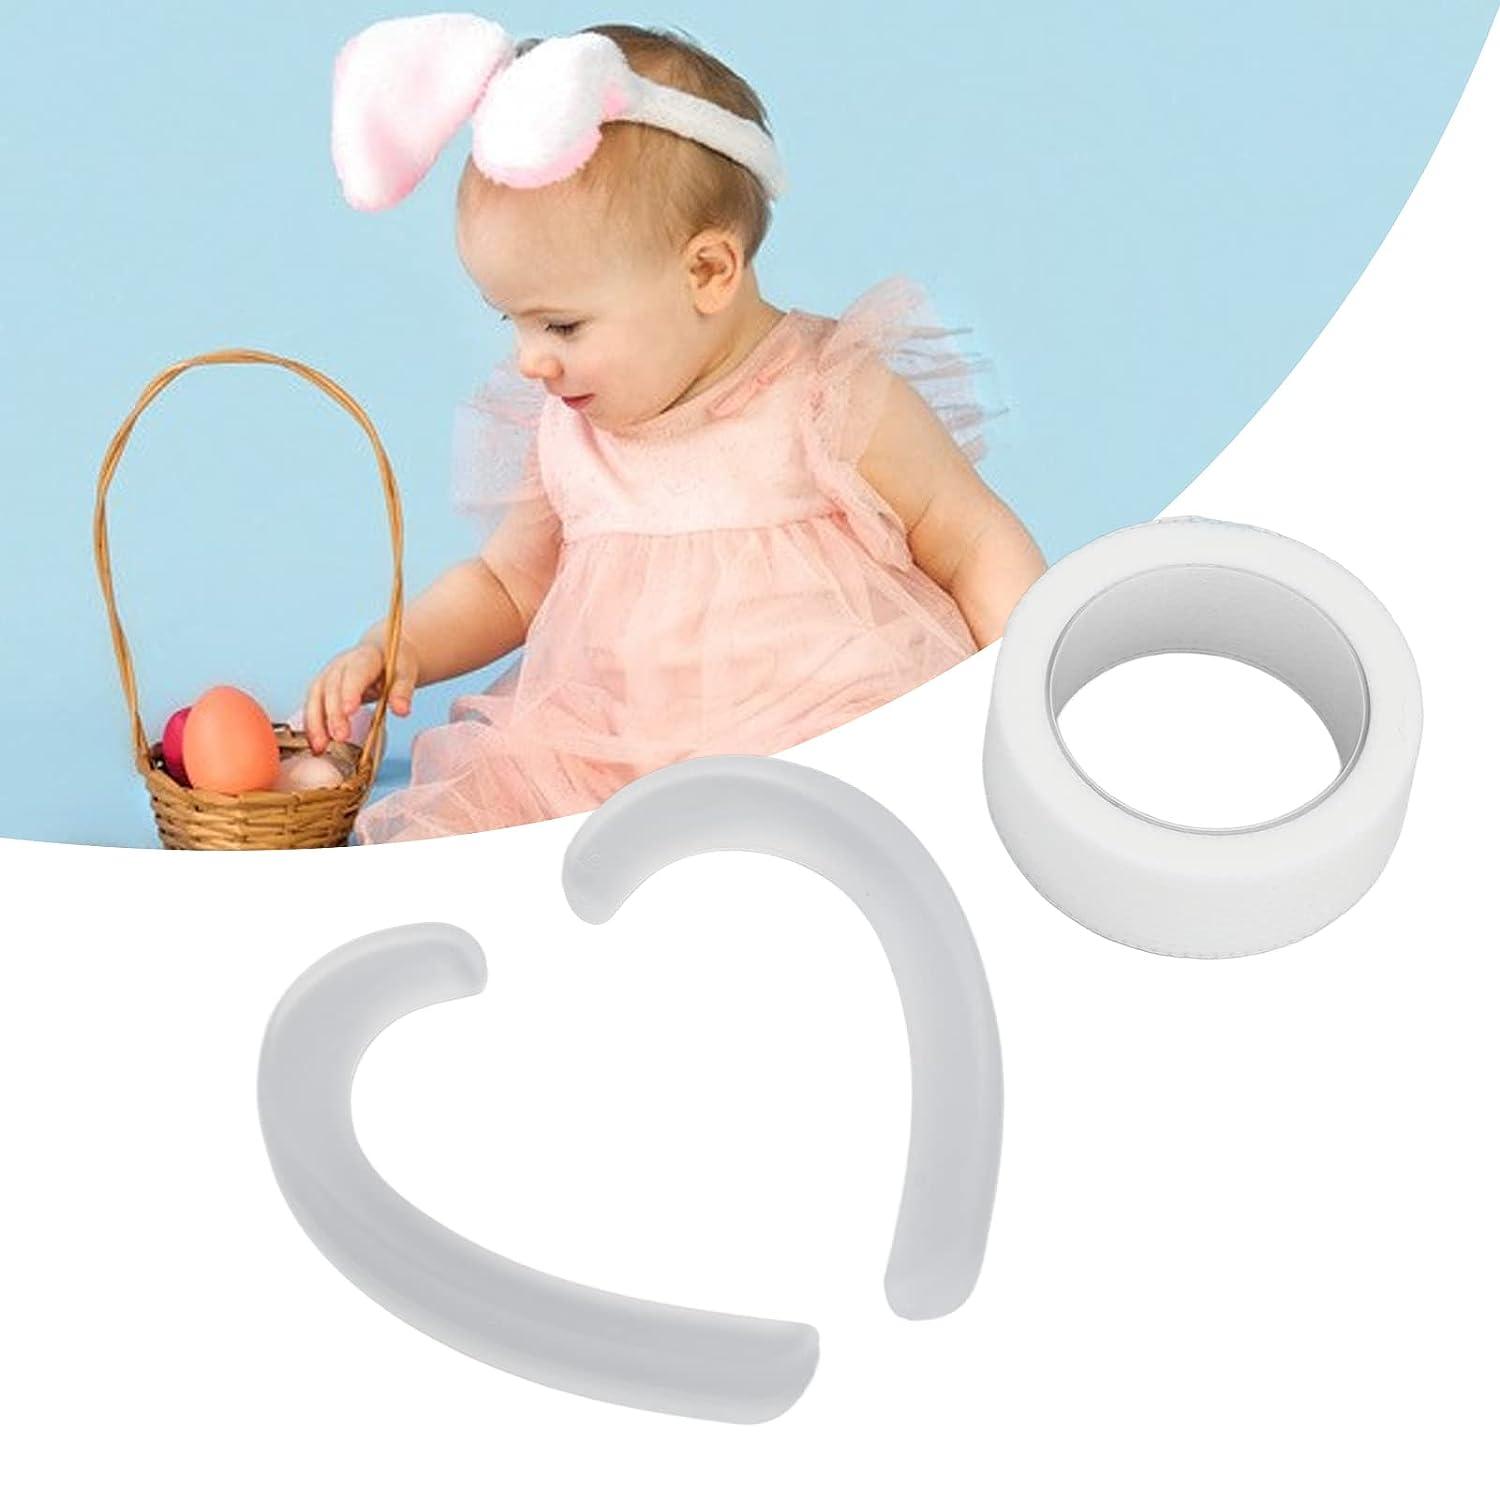 Ear Corrector Correct Deformed Protruding Tape Prominent Ears with  Waterproof and Aesthetic Stickers Fixation Pinning Solution Orthopedic Baby  Items Without Surgery for Newborn Infant Baby